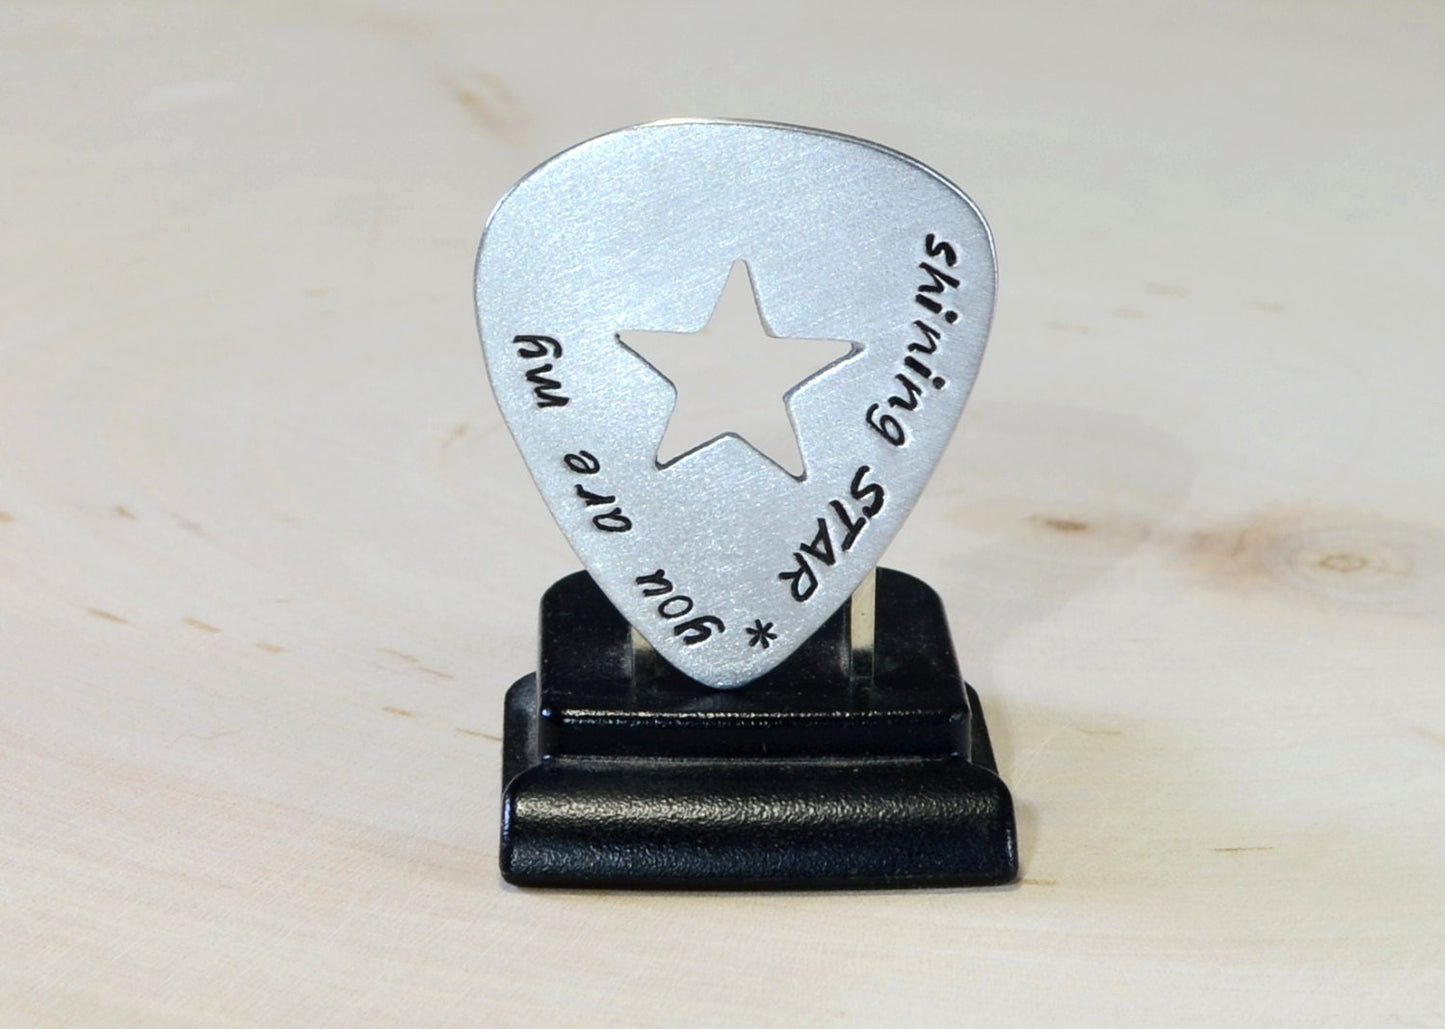 Guitar pick for your shining star in aluminum